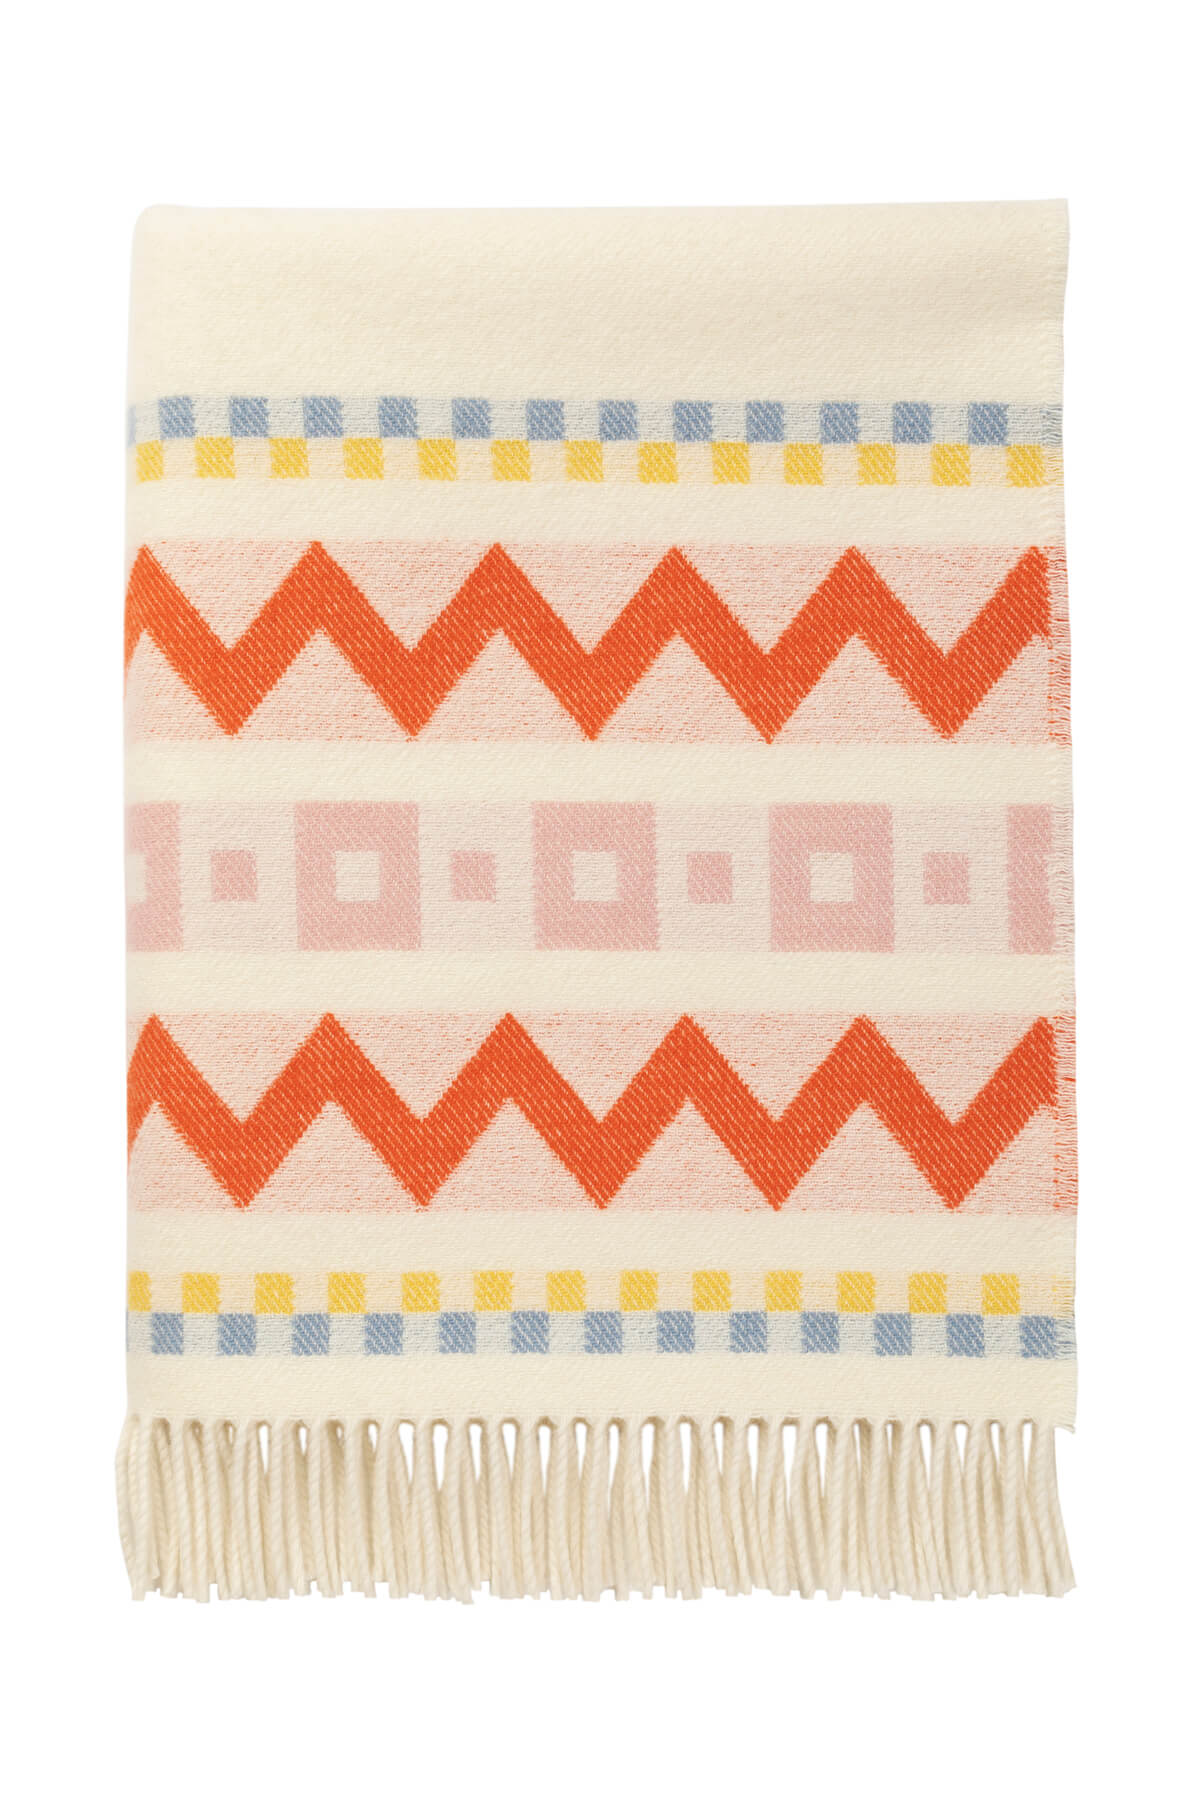 Folded Johnstons of Elgin Children's Zig Zag Blanket in shades of pink, orange, and cream on a white back ground. WB002334RU7277ONE